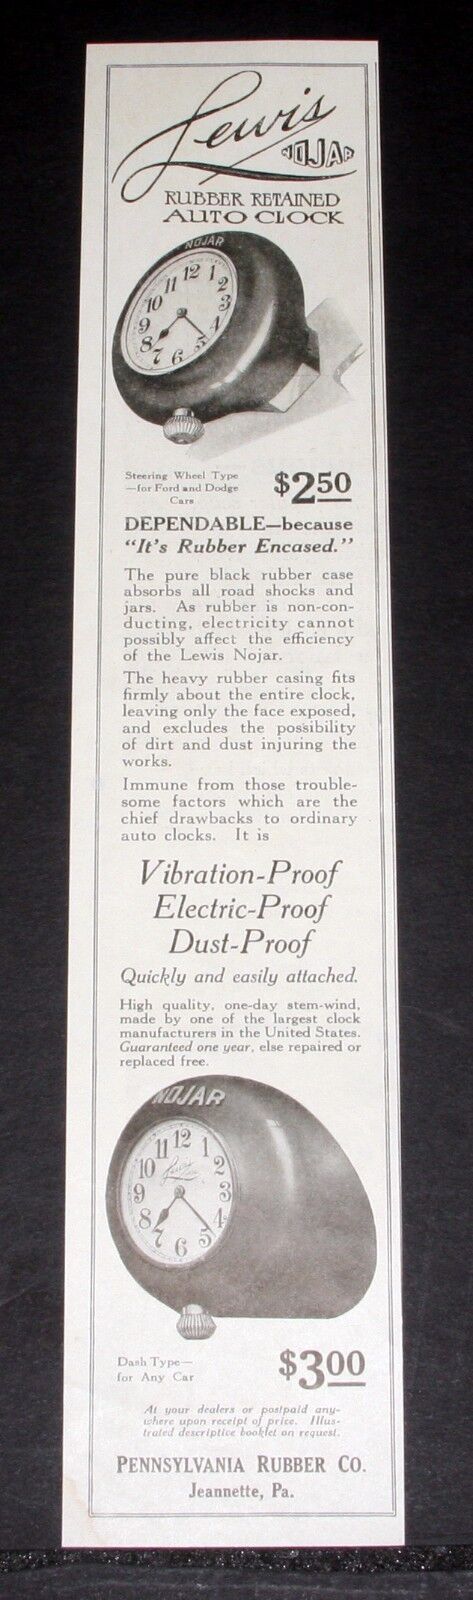 1917 OLD MAGAZINE PRINT AD, LEWIS NOJAR RUBBER RETAINED AUTO CLOCK, DEPENDABLE